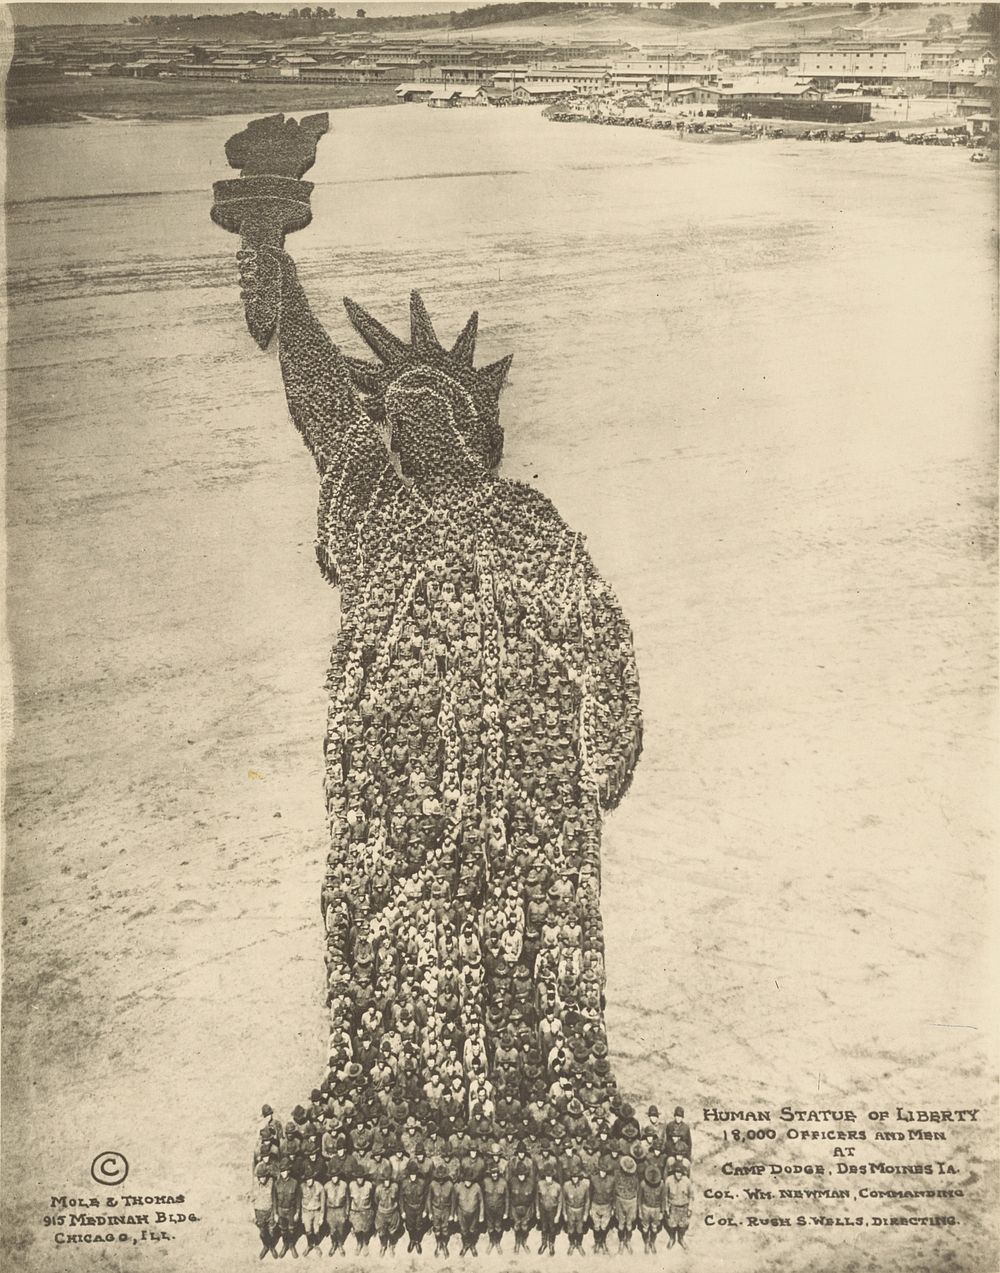 Human Statue of Liberty. 18,000 Officers and Men at Camp Dodge, Des Moines, Ia. Col. Wm. Newman Commanding. Col. Rush S.…